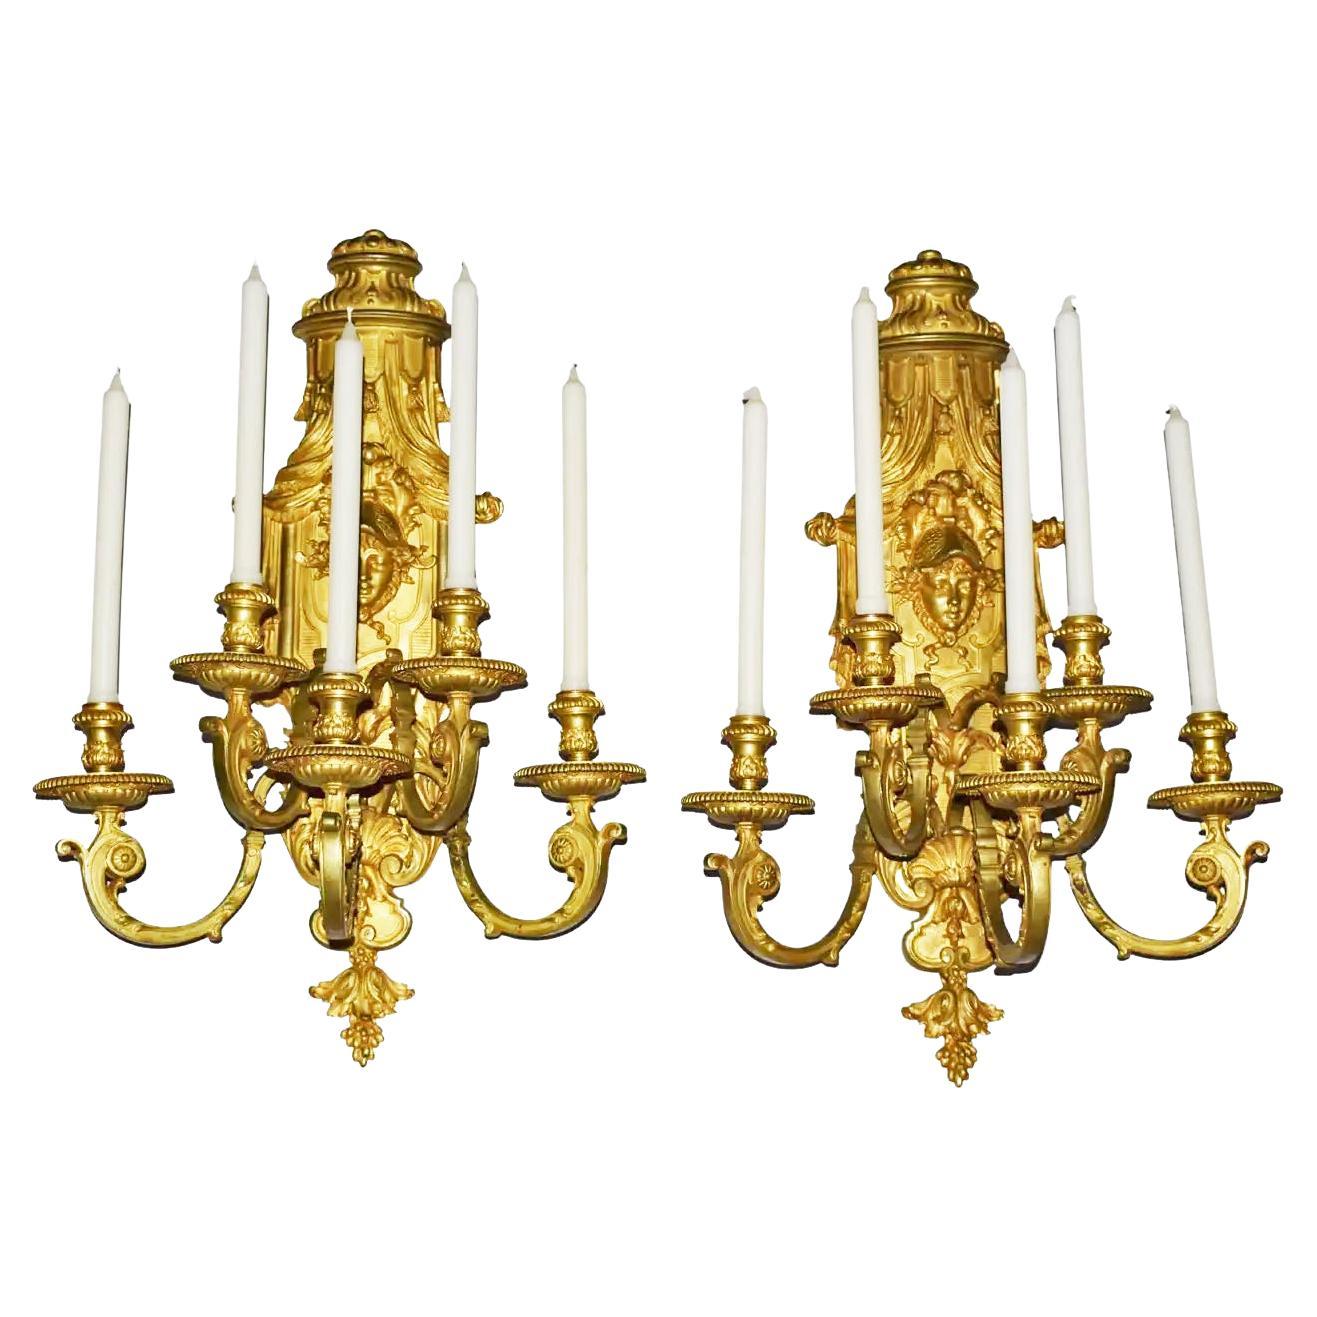 Very Fine Pair of Regency Style Gilt Bronze Wall Sconces